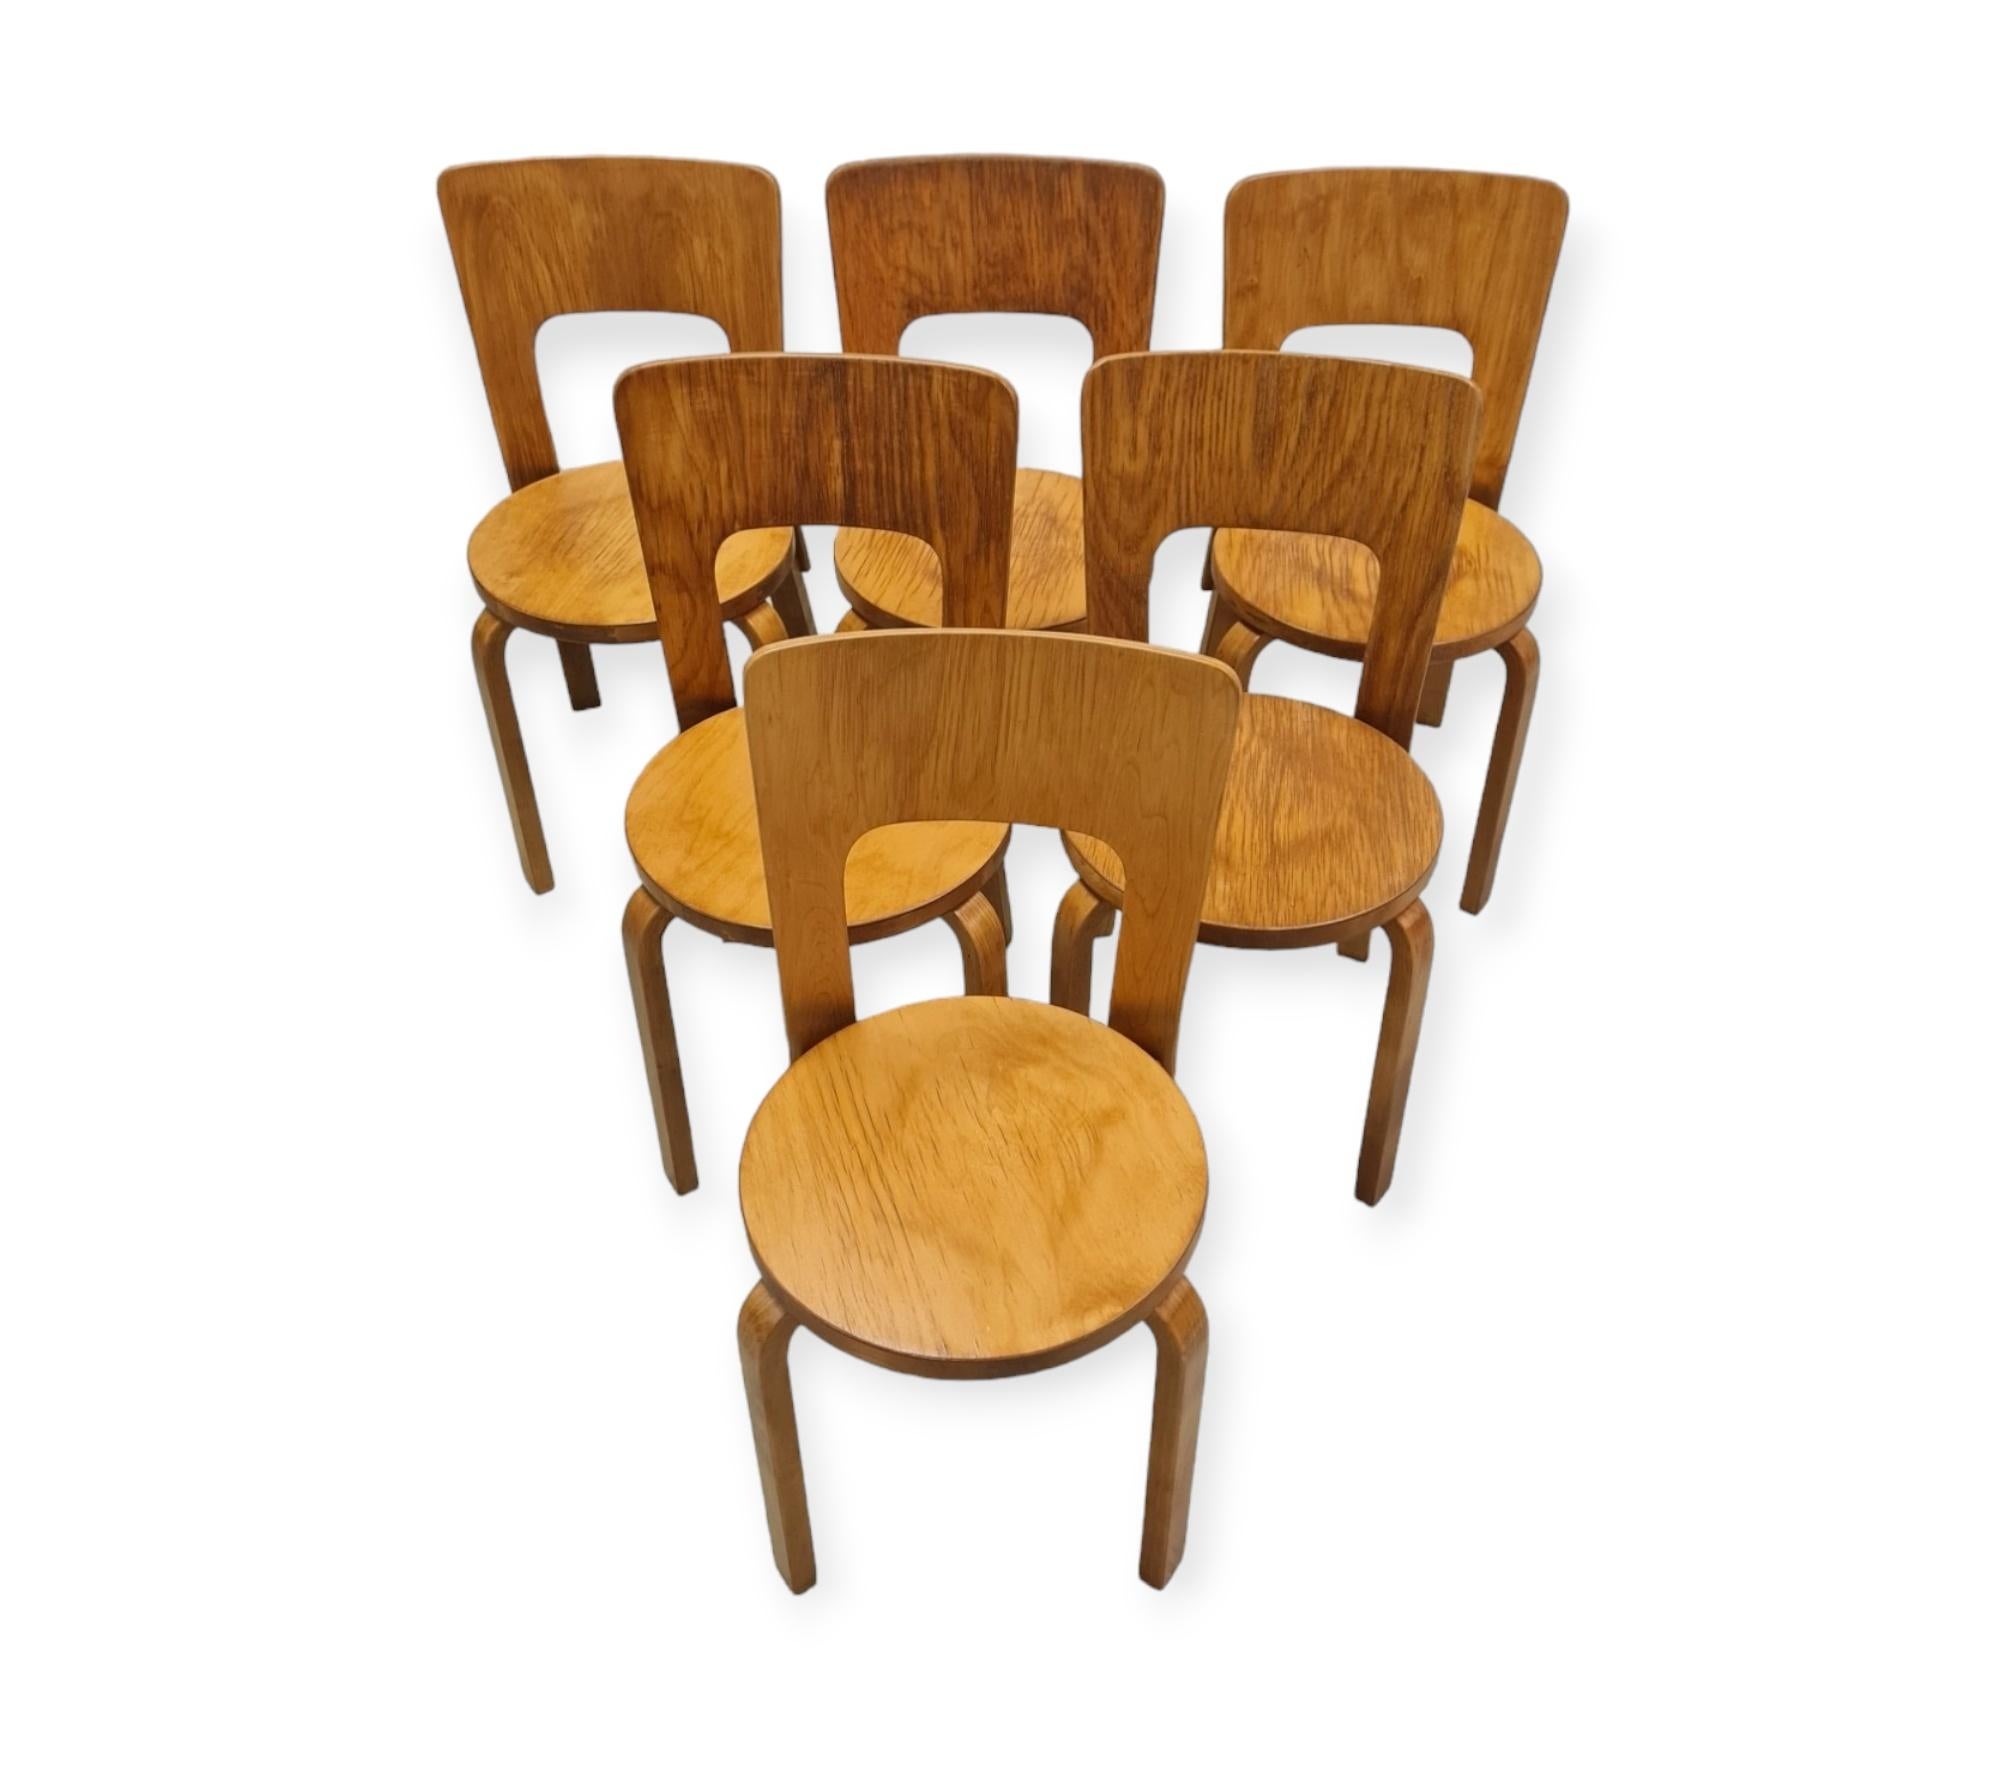 Alvar Aalto Dinning Set with Lazy Susan and 6 Model 66 chairs, 1940s For Sale 11